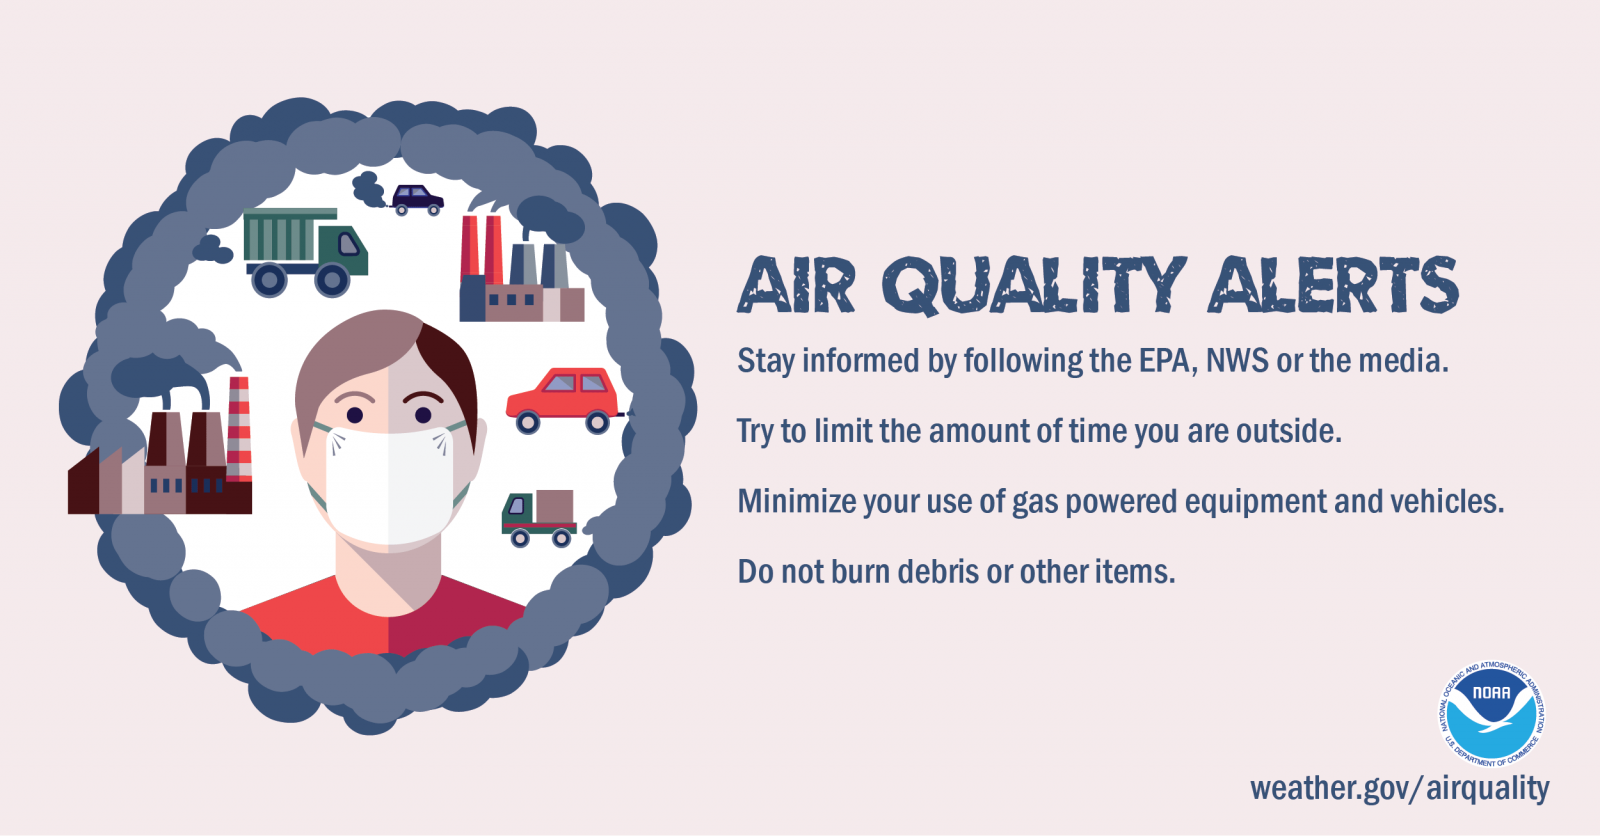 Air Quality Alerts: Stay informed by following the EPA, NWS or the media. Try to limit the amount of time you are outside. Minimize your use of gas powered equipment and vehicles. Do not burn debris or other items.